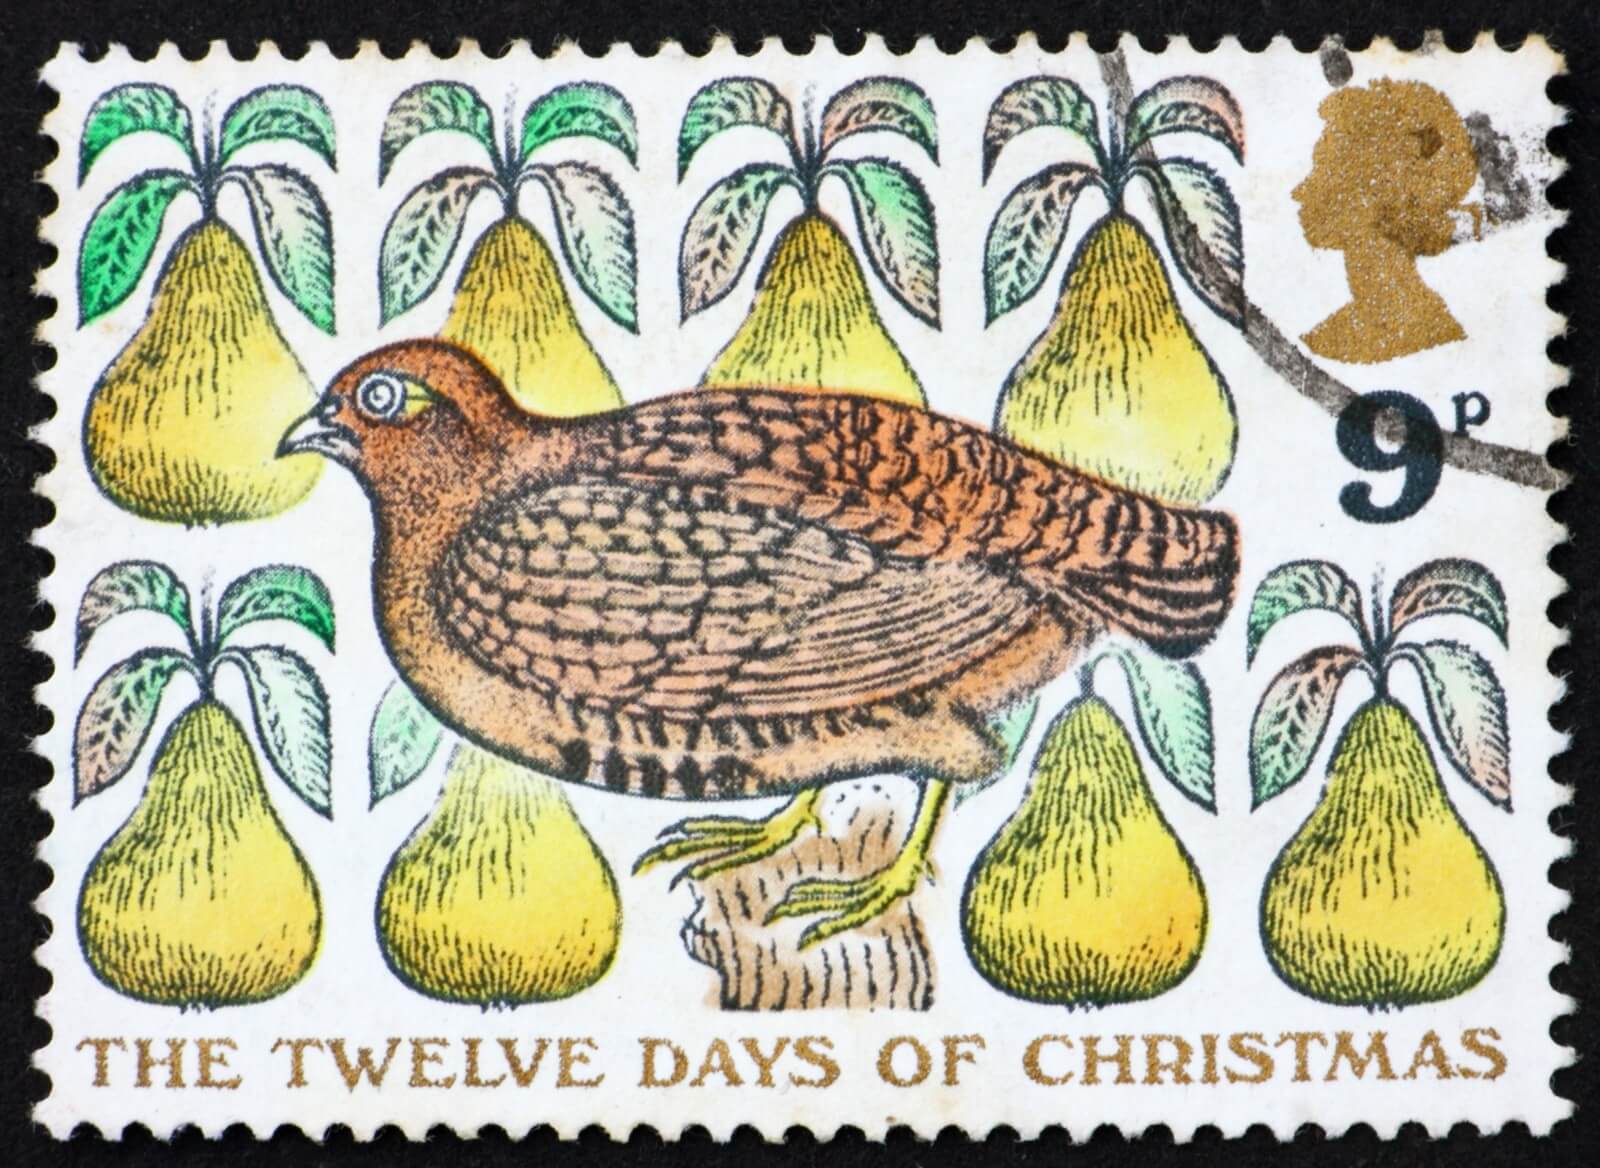 British Postage Stamp “The Twelve Days of Christmas” with a Partridge in a Pear Tree